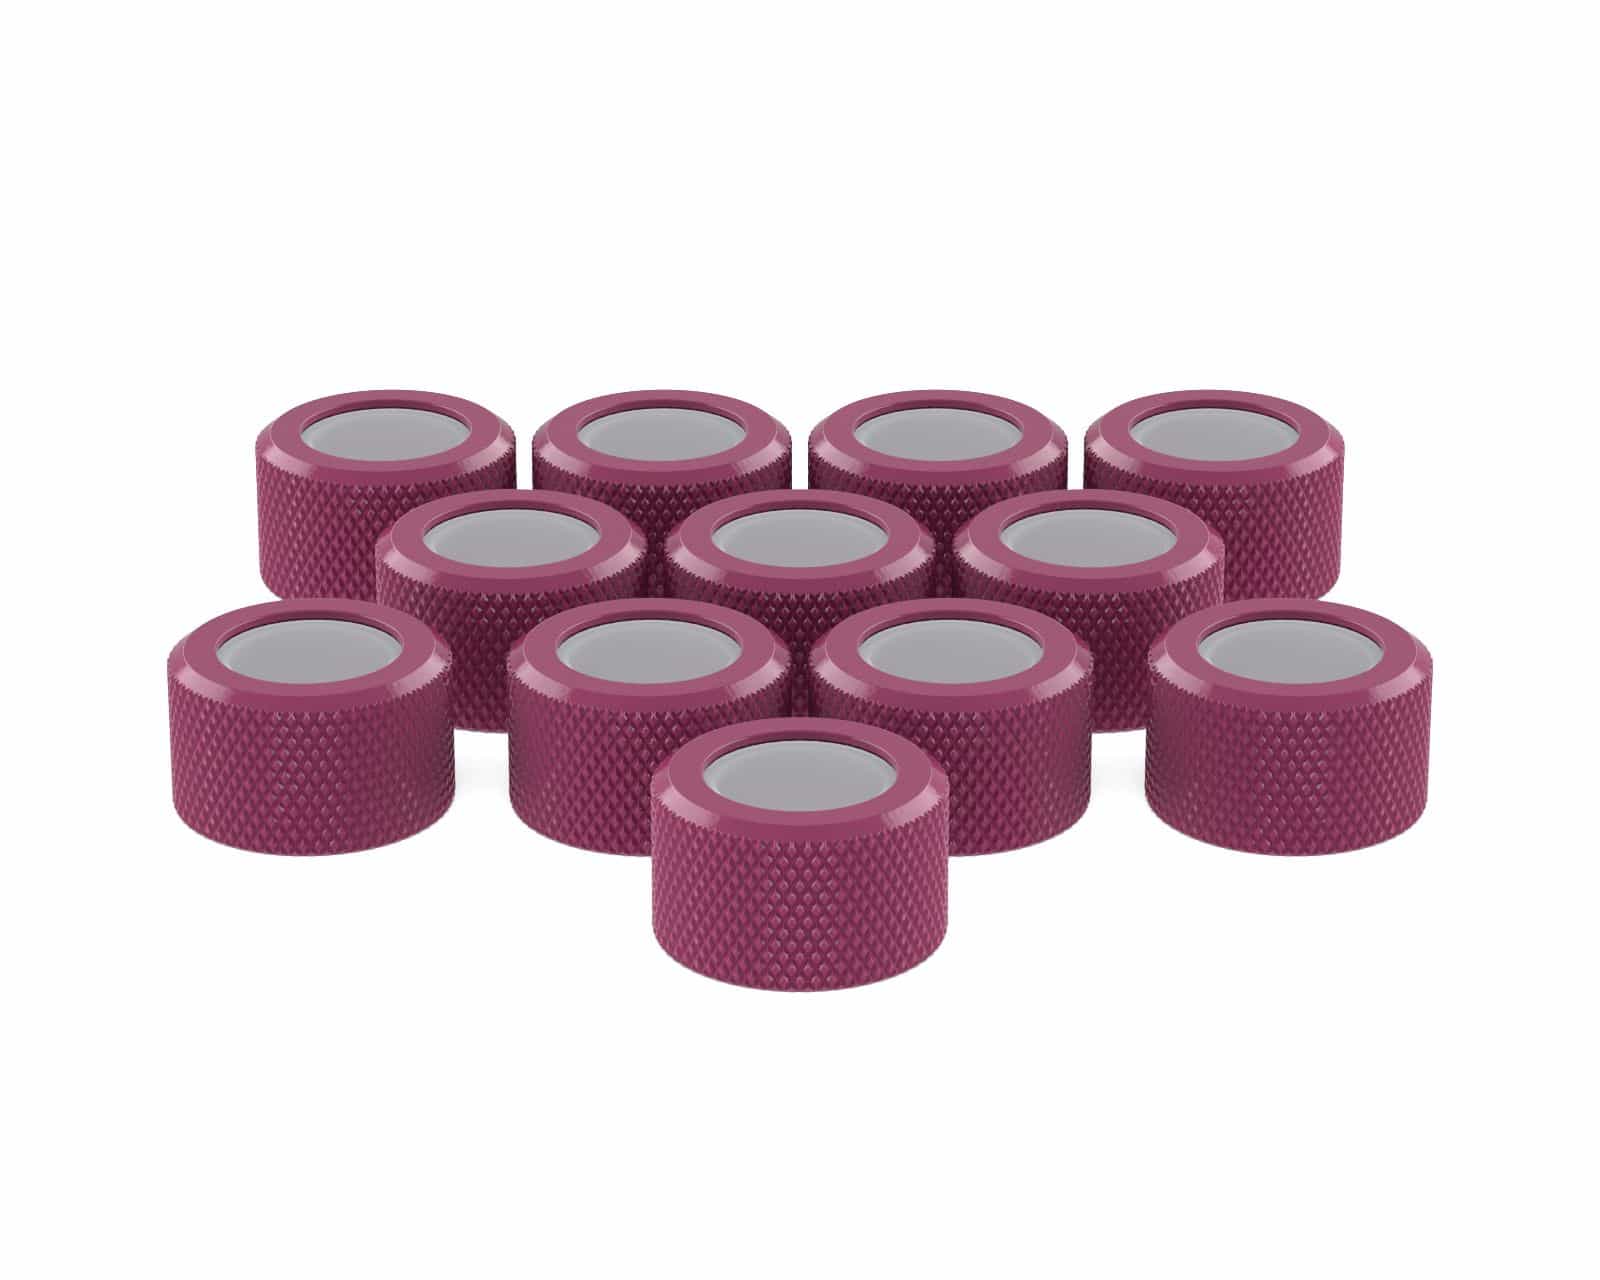 PrimoChill RMSX Replacement Cap Switch Over Kit - 16mm - PrimoChill - KEEPING IT COOL Magenta